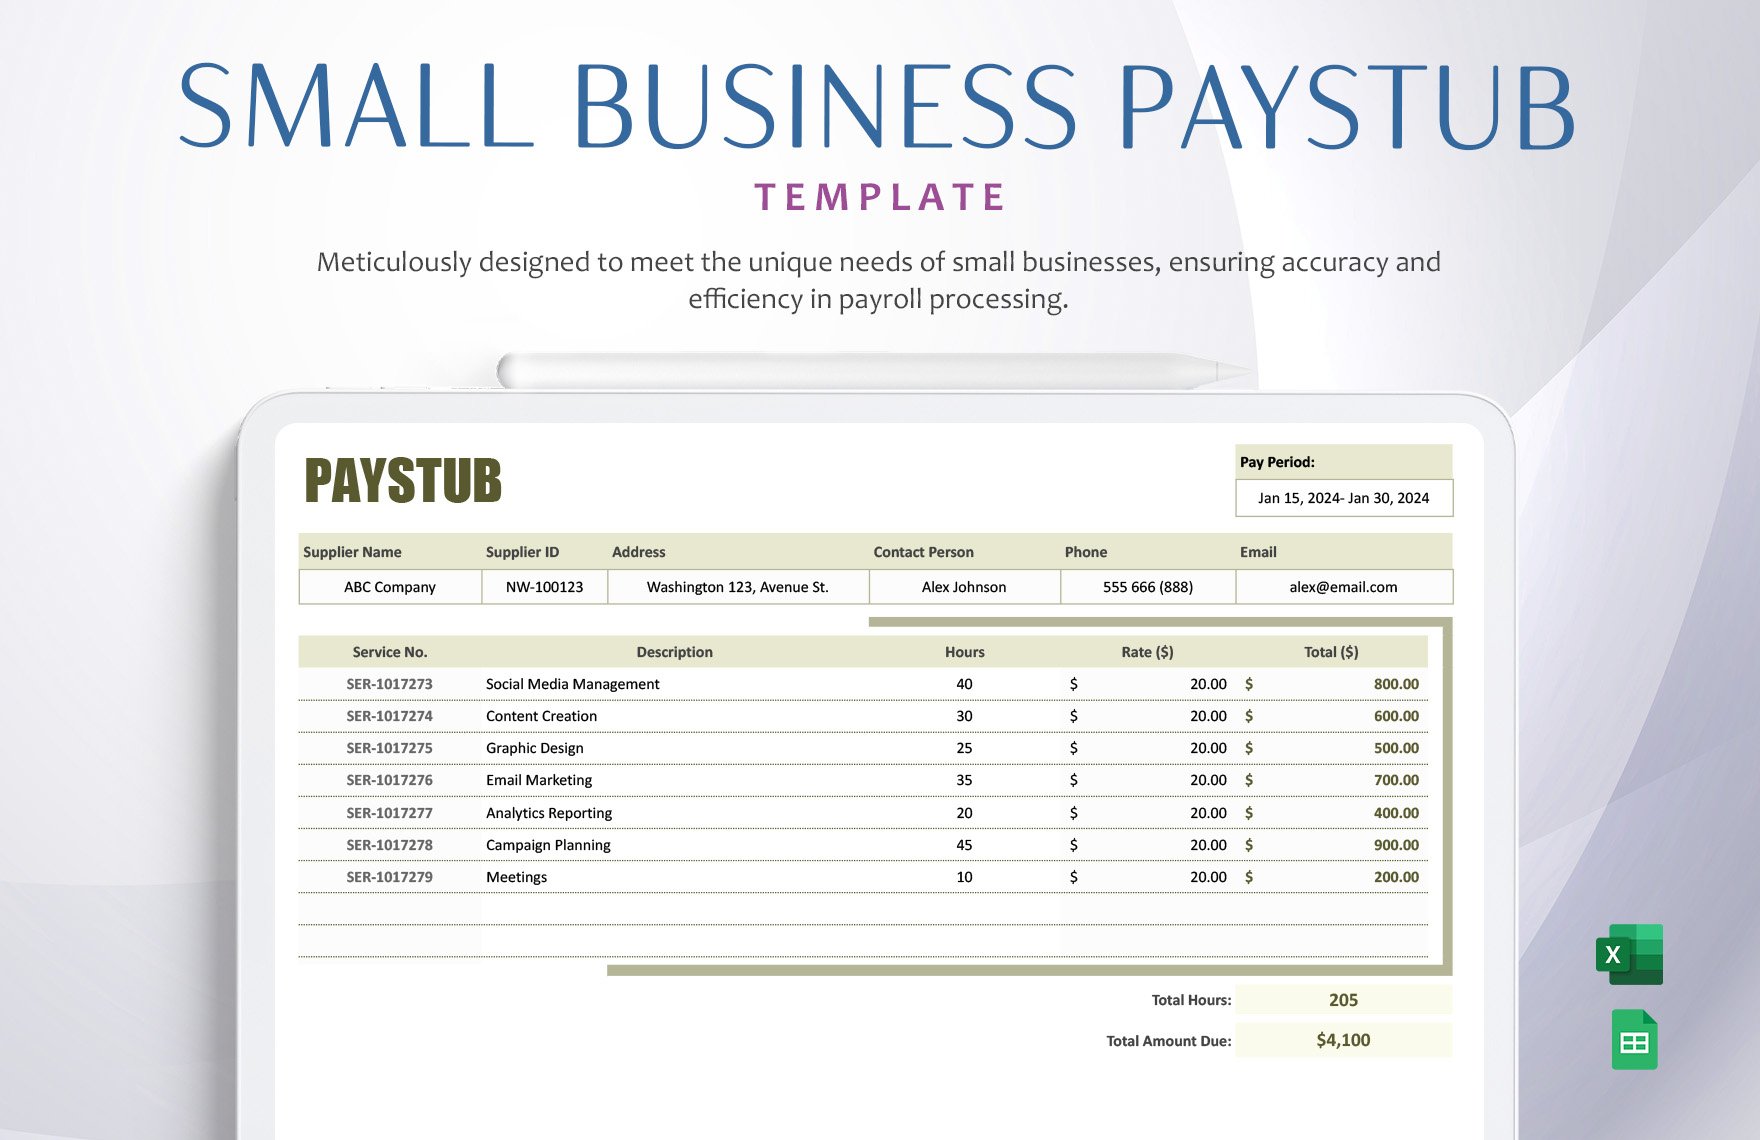 Small Business Paystub Template in Excel, Google Sheets